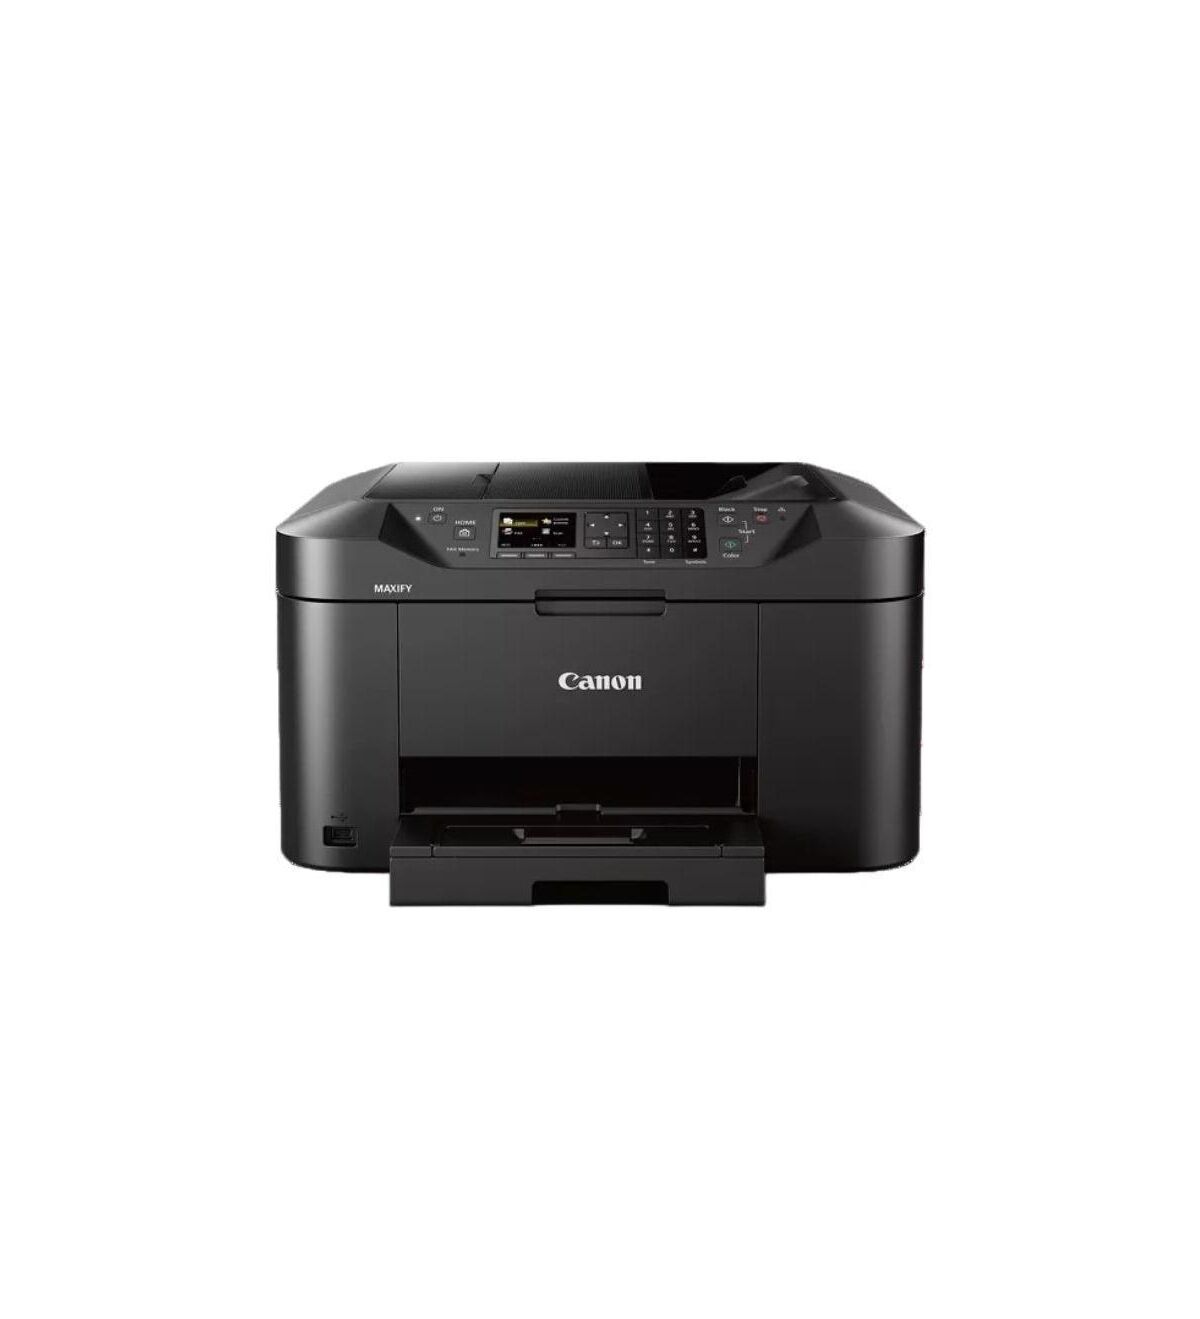 Canon Maxify MB2120 Wireless Home Office All-in-One Inkjet Printer - Black